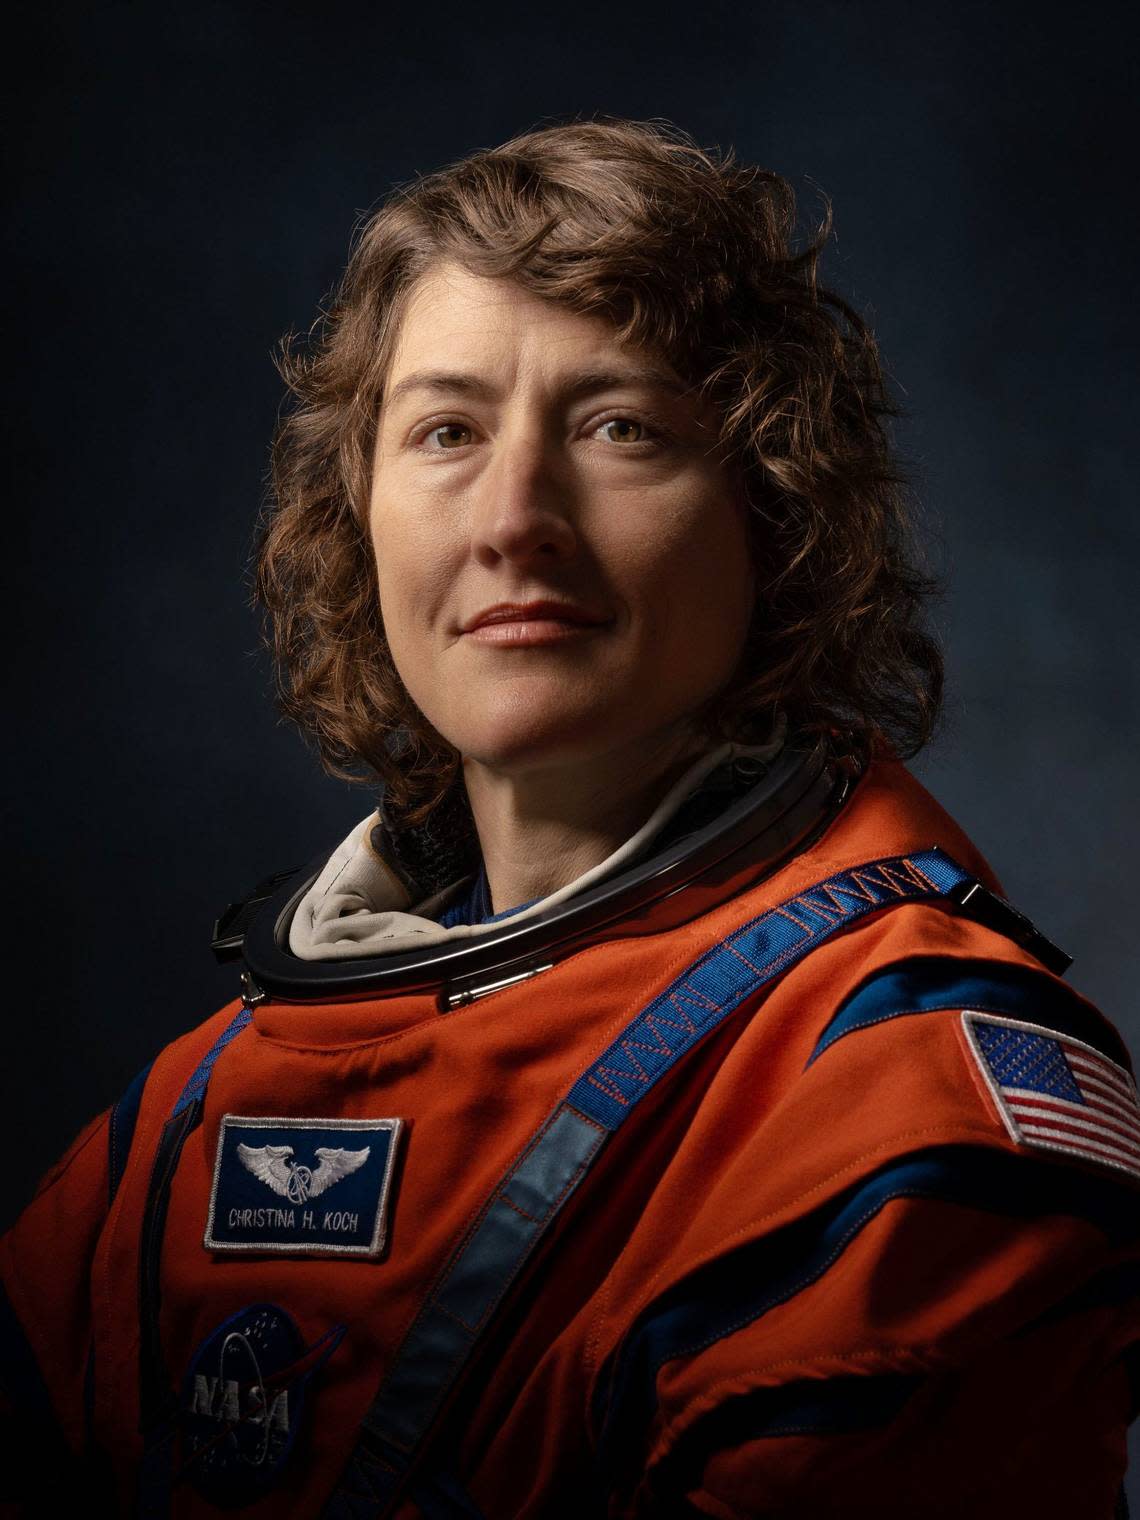 Christina Koch will be a mission specialist on the Artemis II mission to the moon in 2024. She took part in the first all-woman spacewalk in 2019. She grew up in Jacksonville, NC, and graduated from N.C. State University.